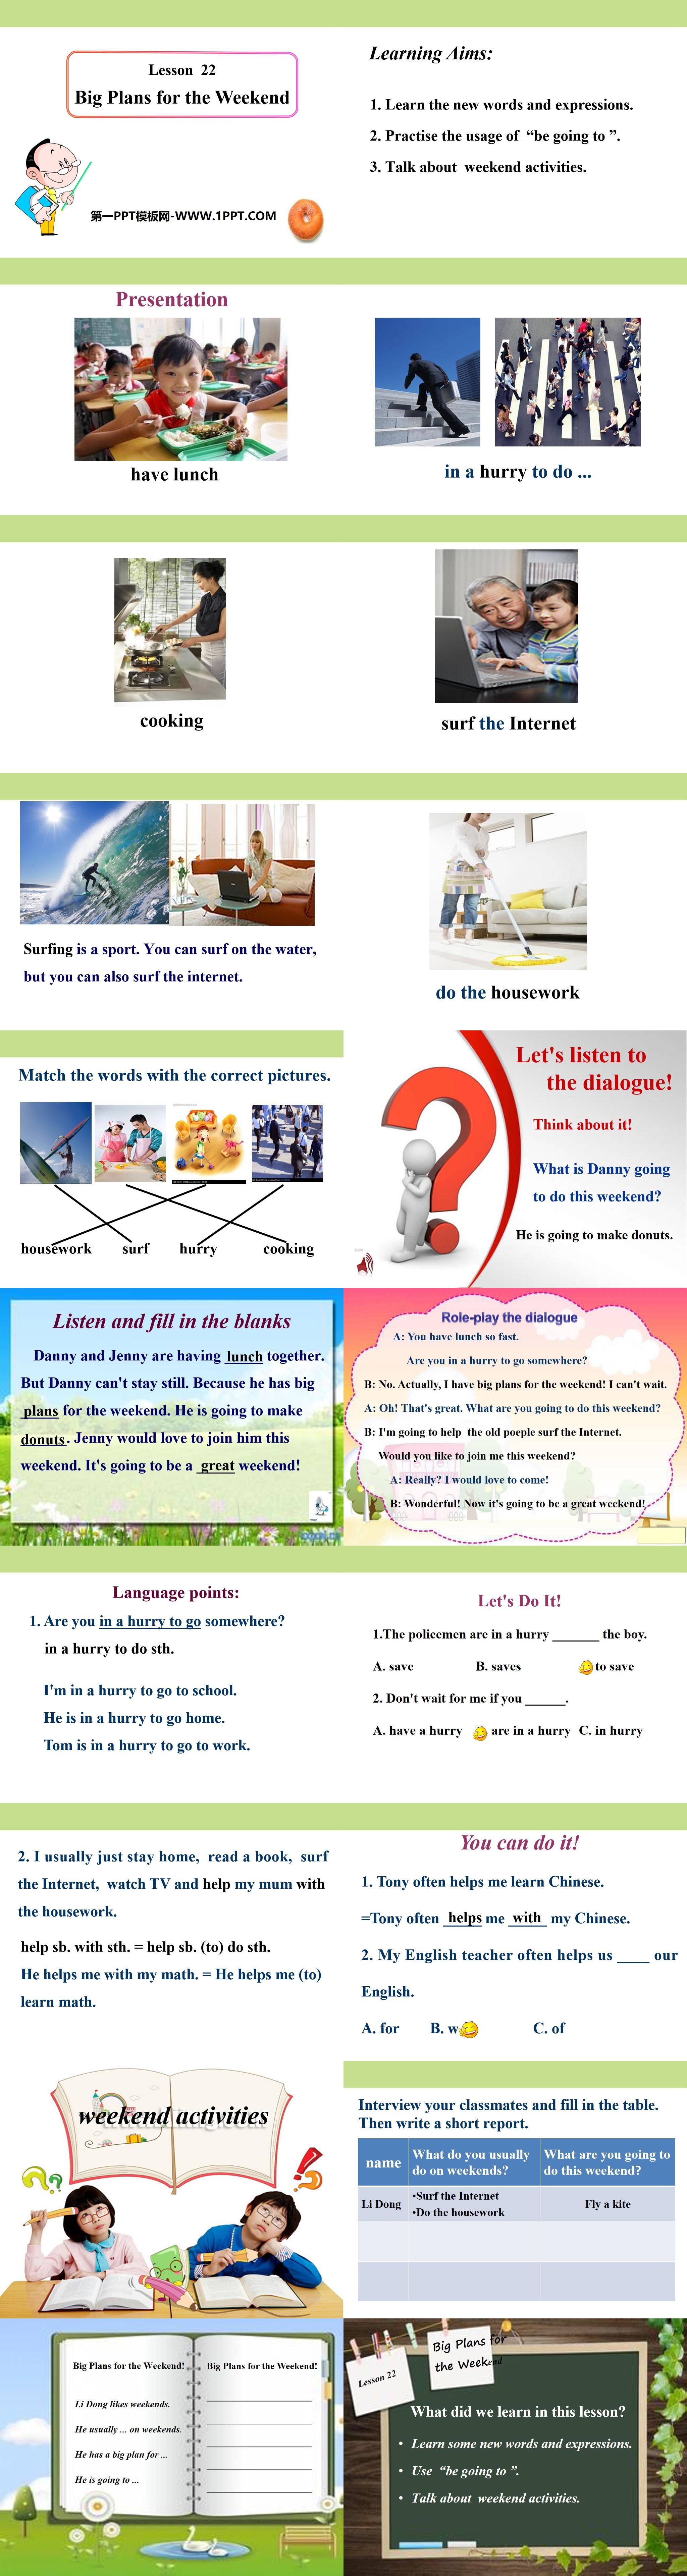 《Big Plans for the Weekend》After-School Activities PPT
（2）